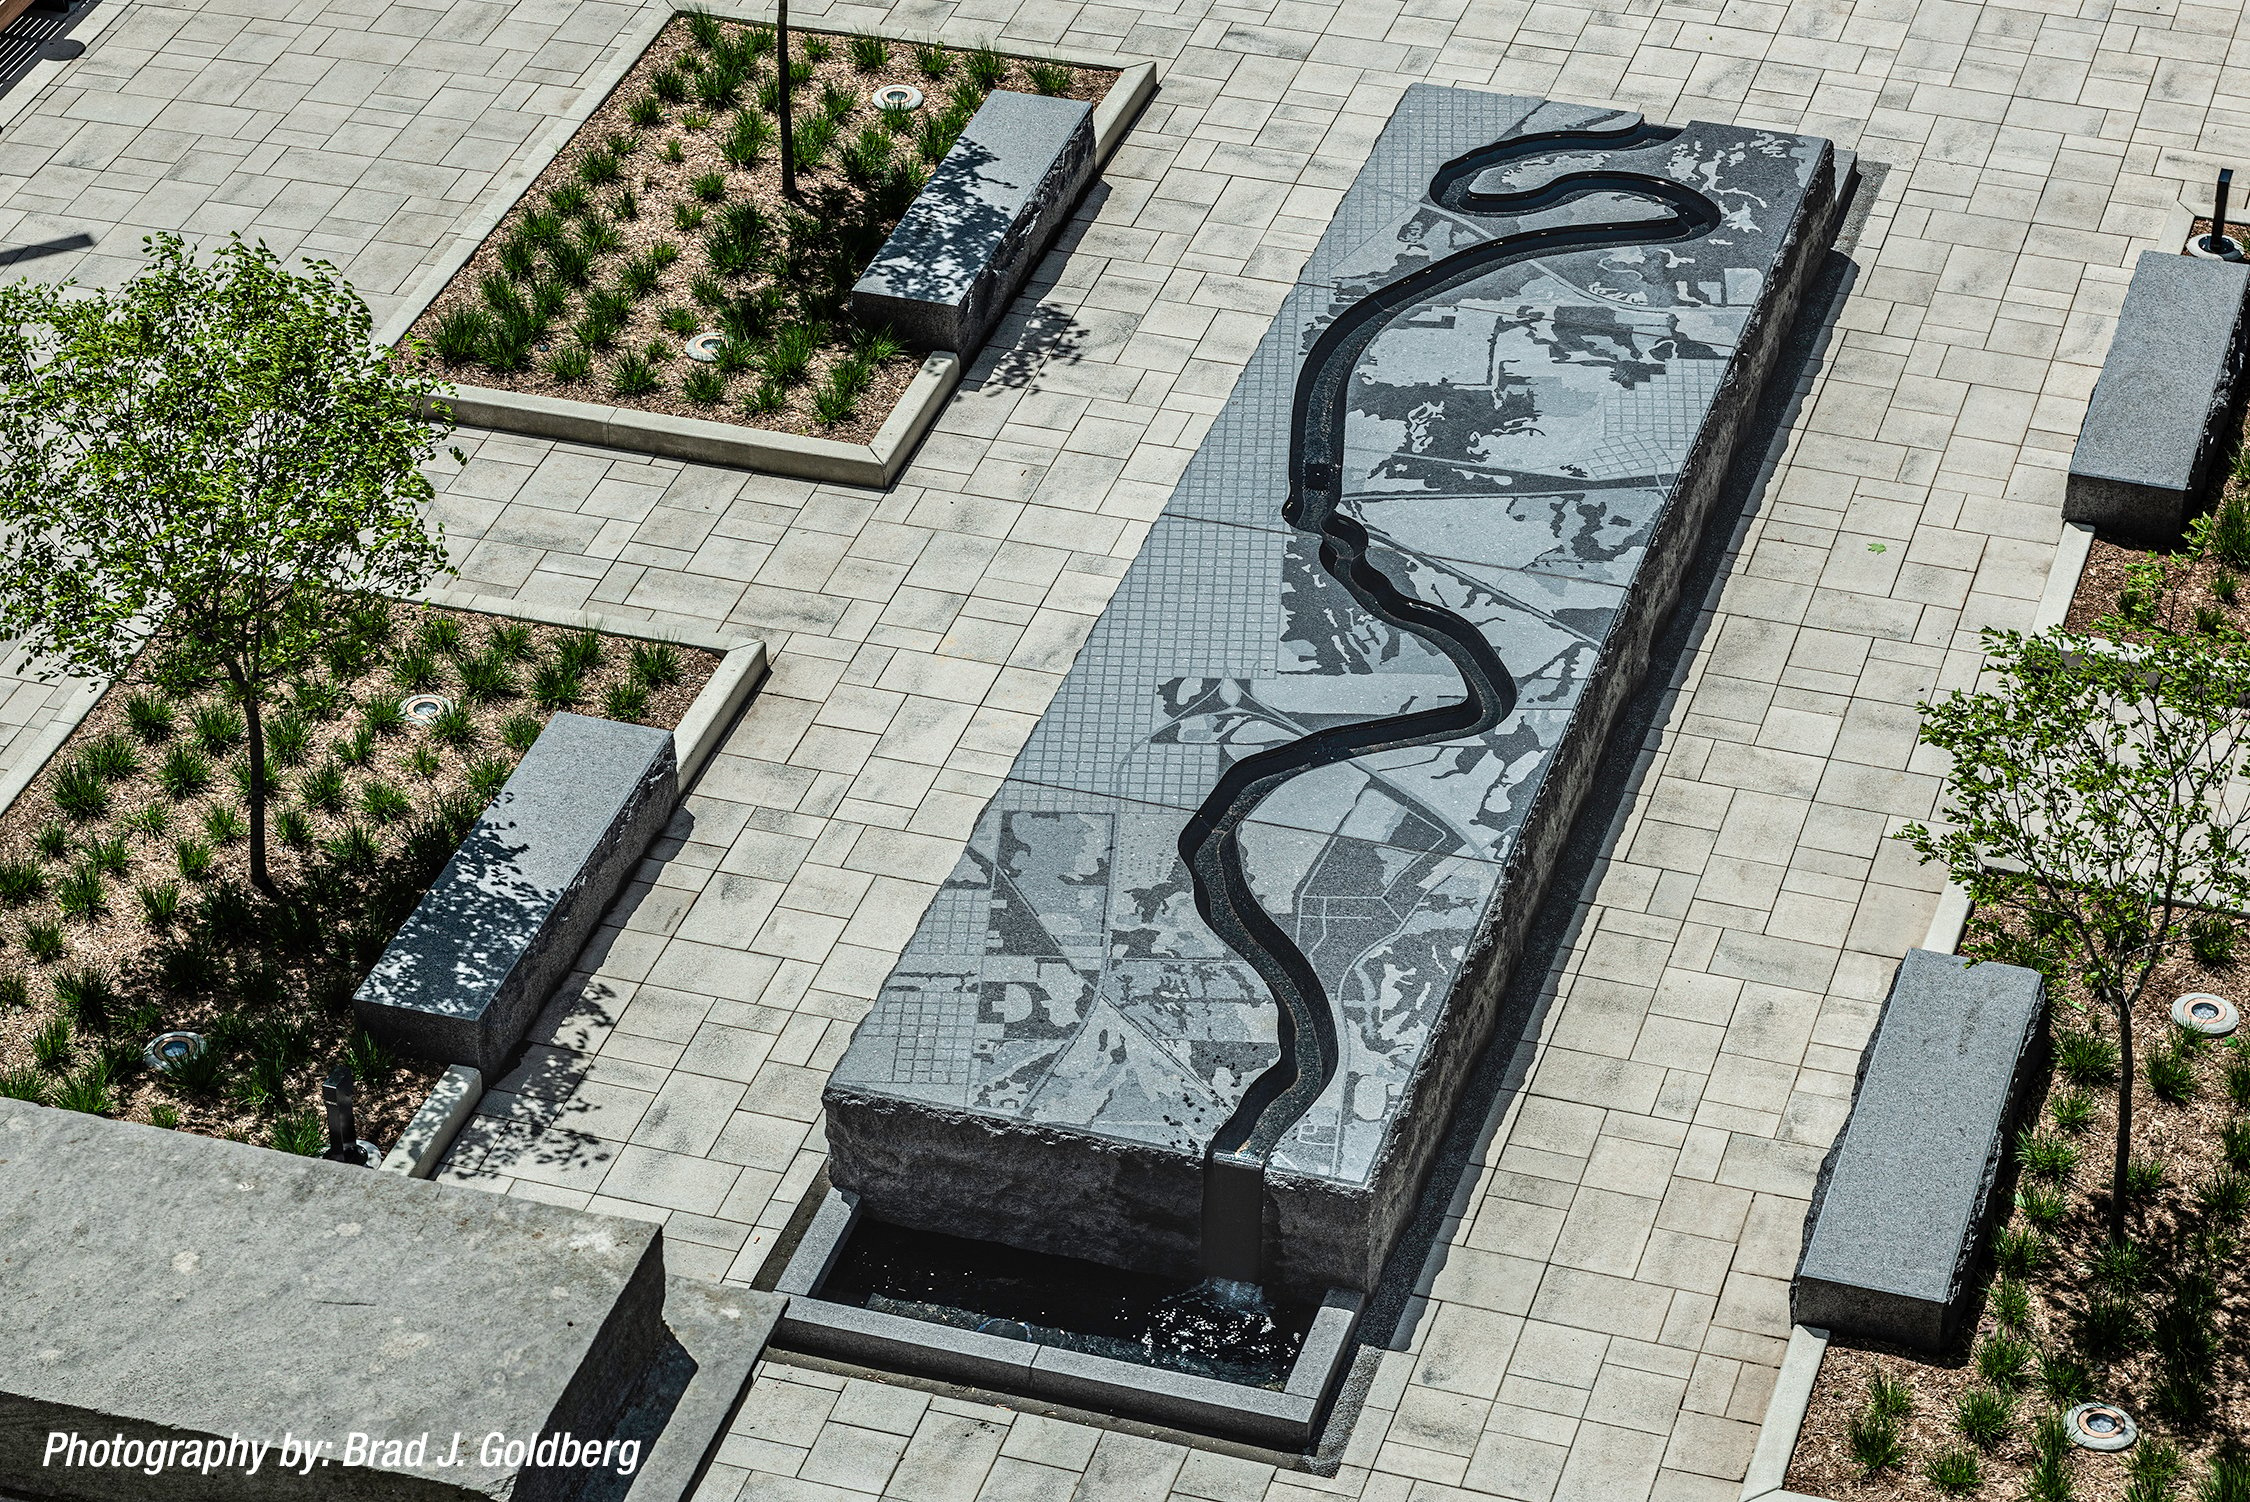 View from above the carved granite fountain sculpture